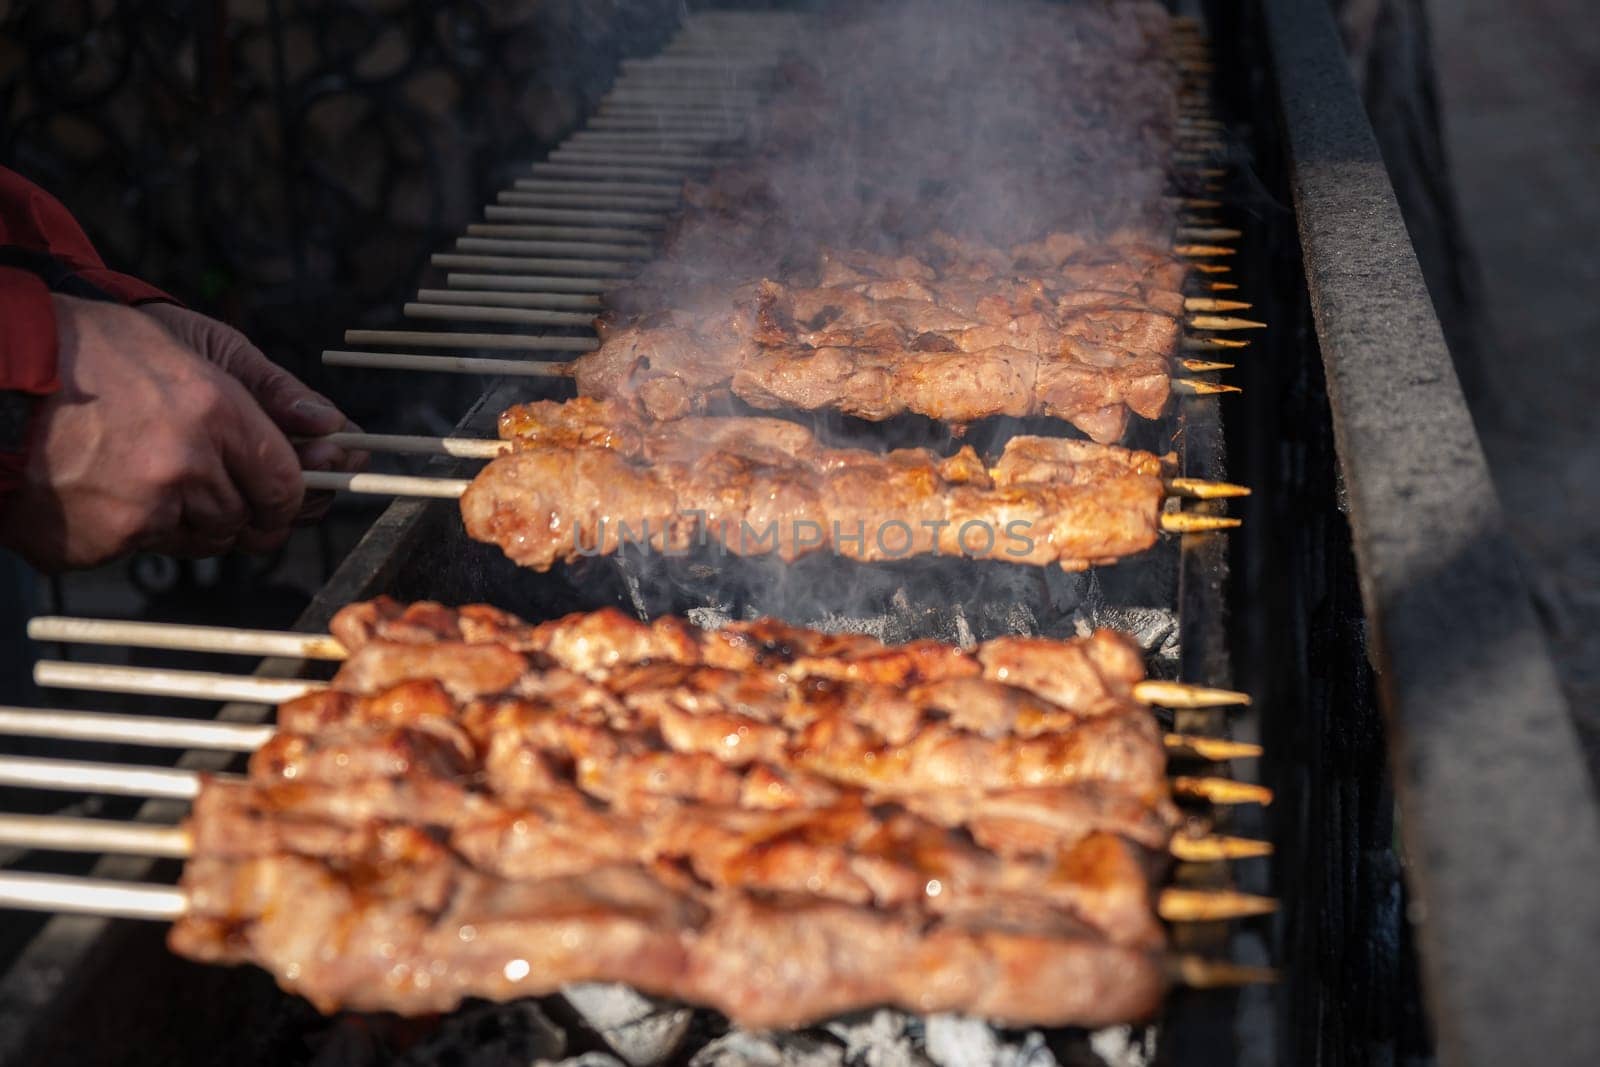 A lot of juicy meat kebabs in a row on the grill. Meat pieces strung on wooden skewers on the grill. The process of cooking kebabs with a lot of smoke. Cooking in nature